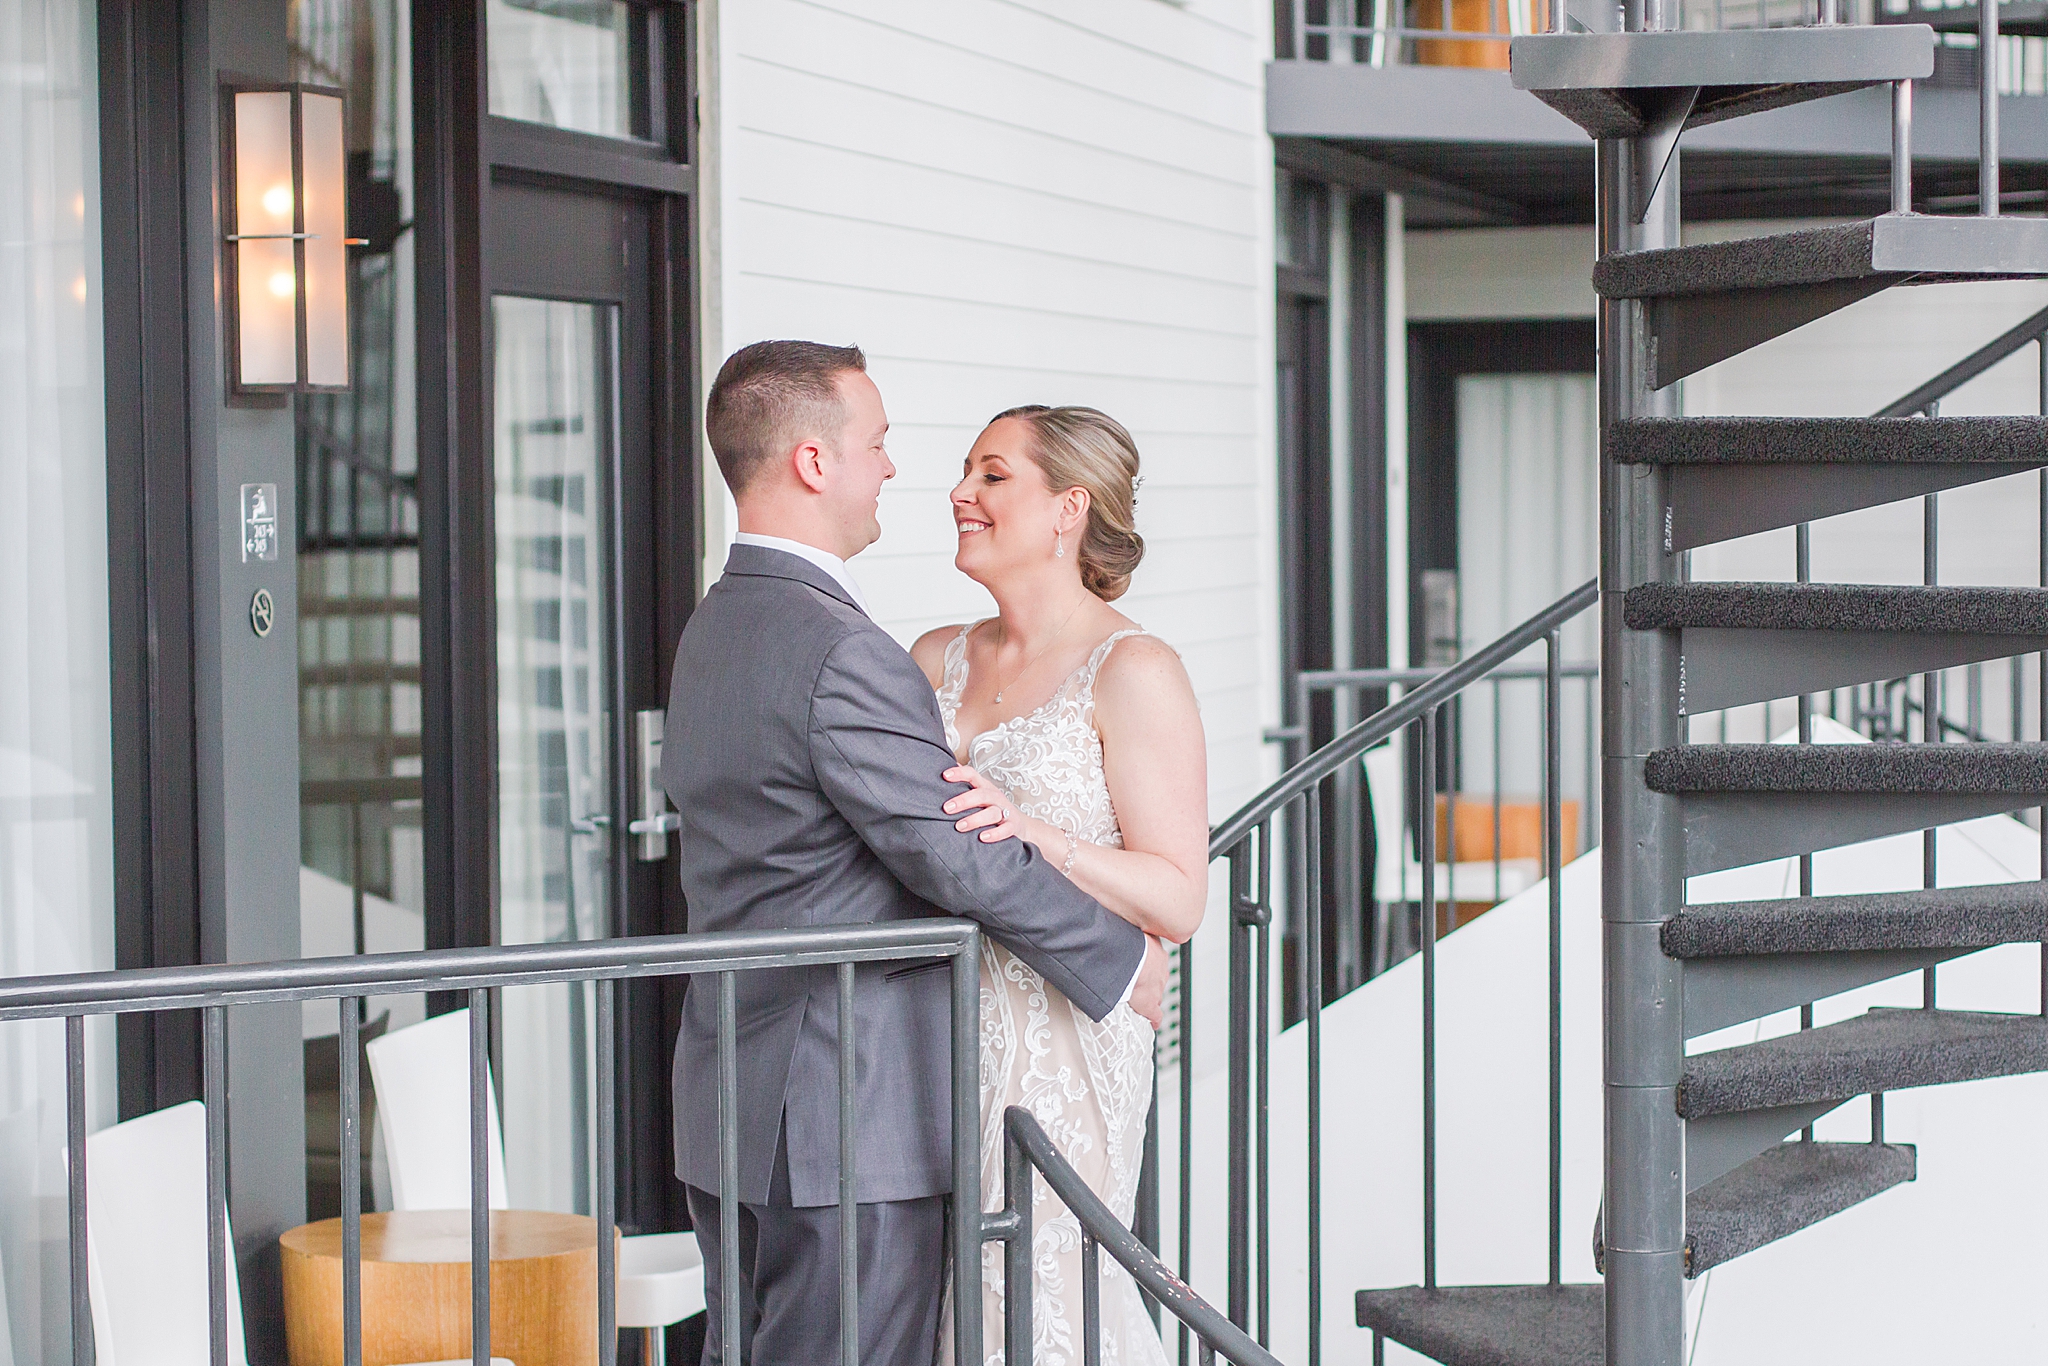 modern-romantic-wedding-photography-at-webers-in-ann-arbor-michigan-by-courtney-carolyn-photography_0053.jpg